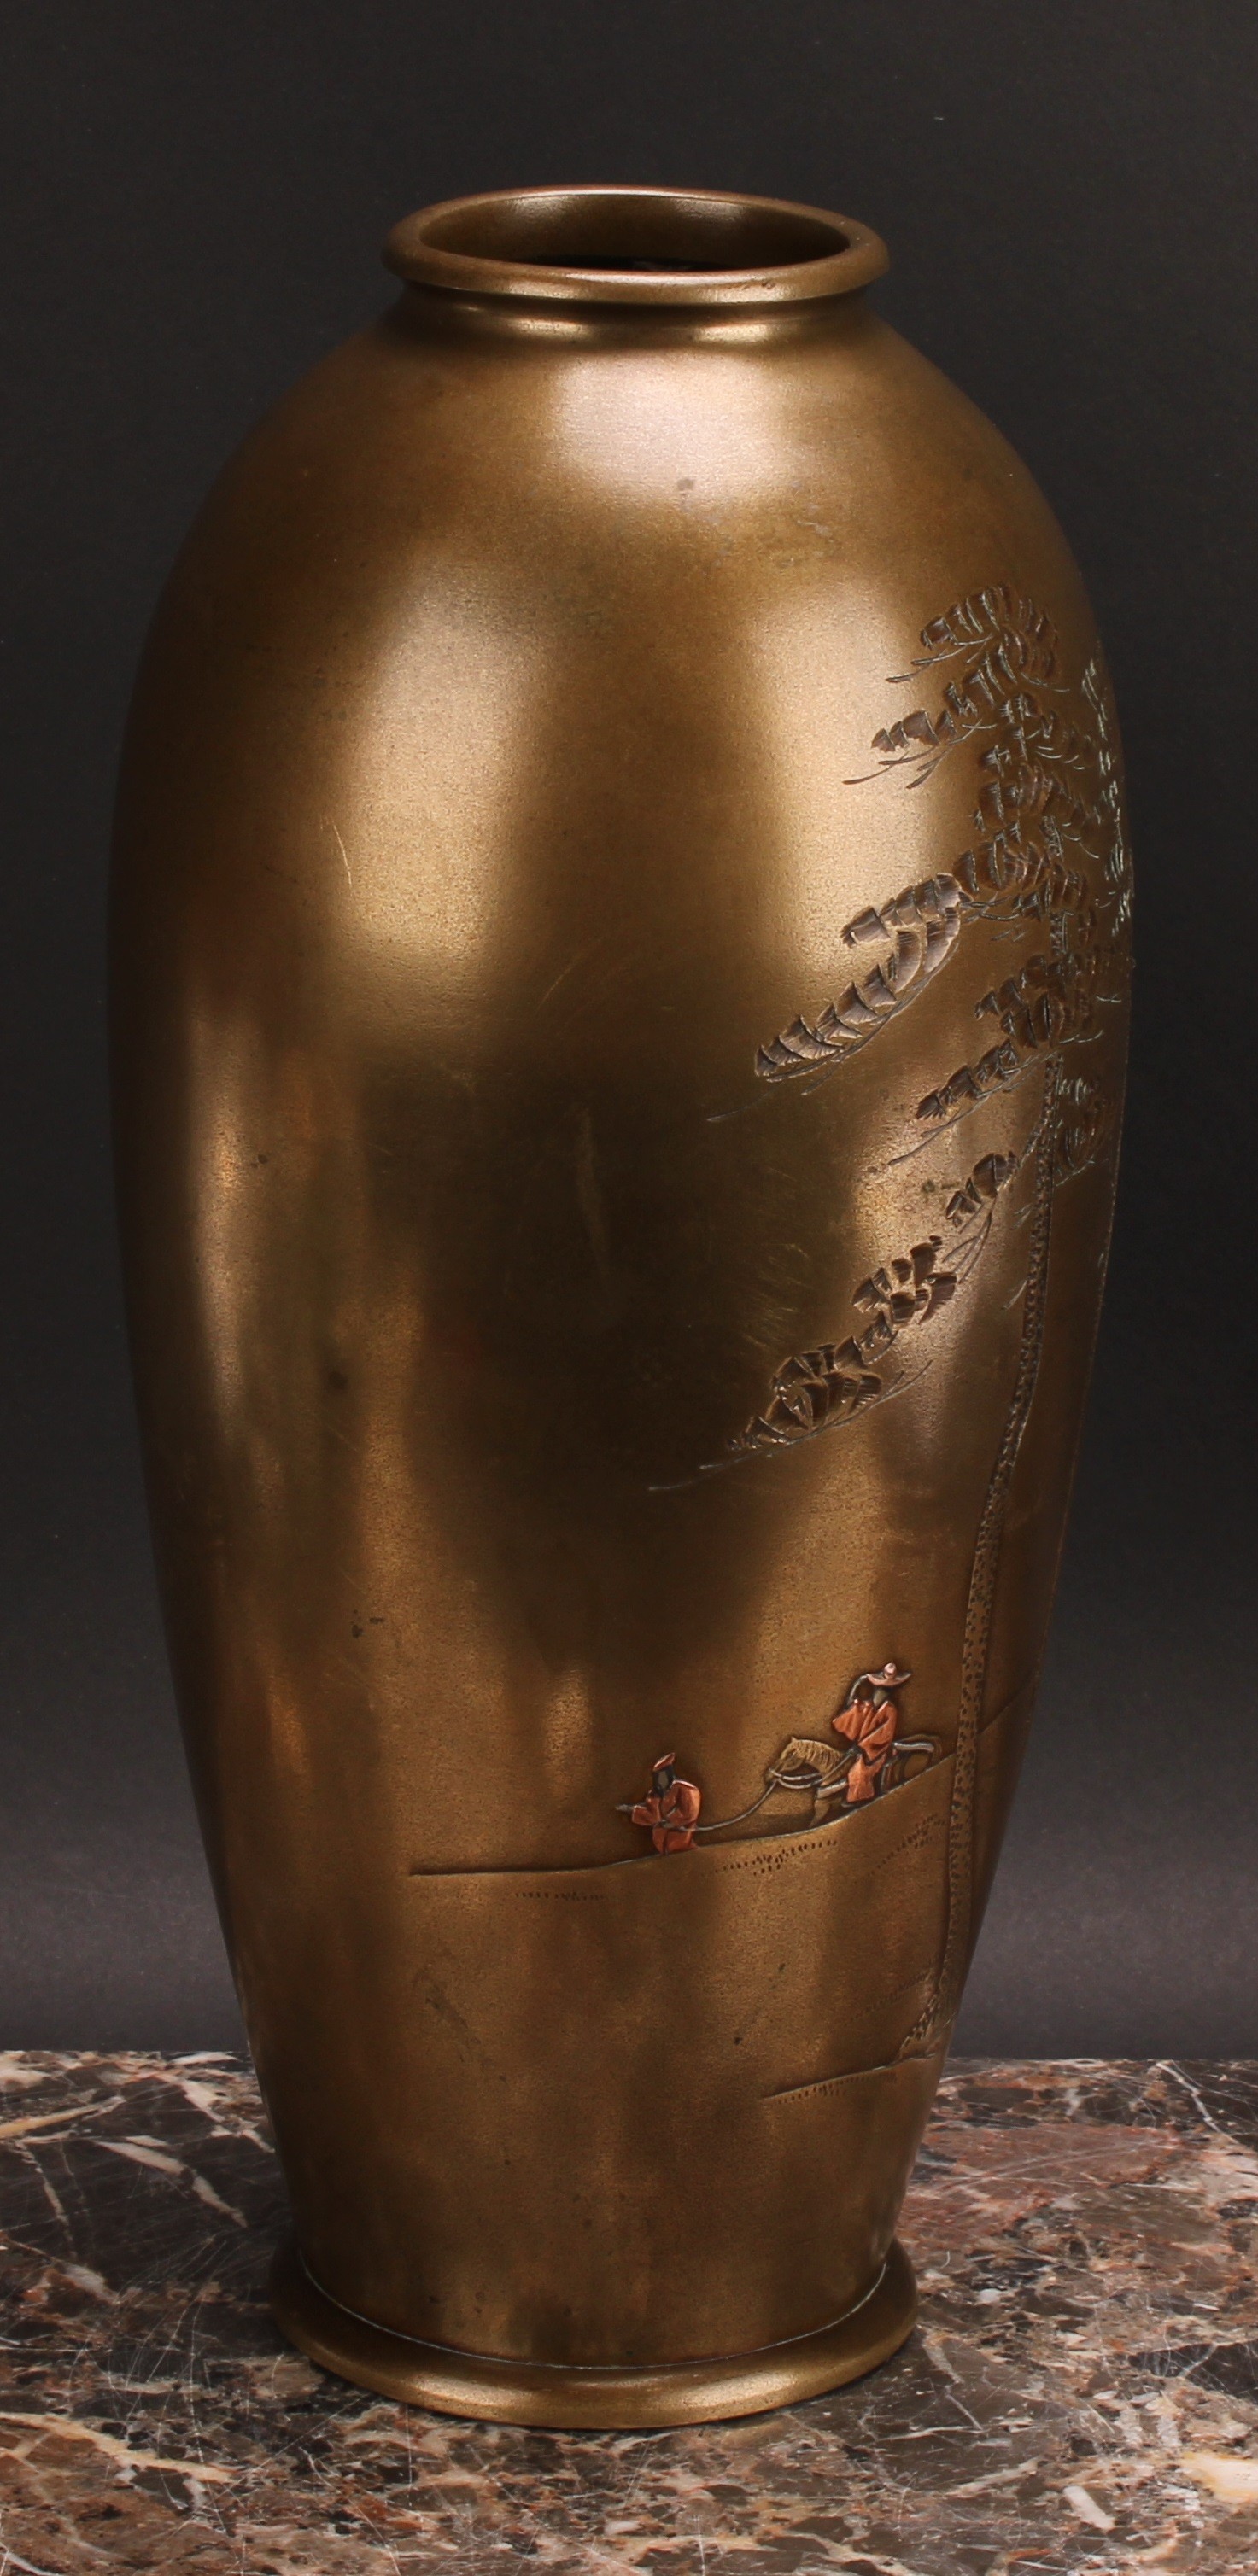 Miura Chikusen (1854 - 1915), a Japanese bronze vase, decorated with figures by trees, 30.5cm high - Image 2 of 3